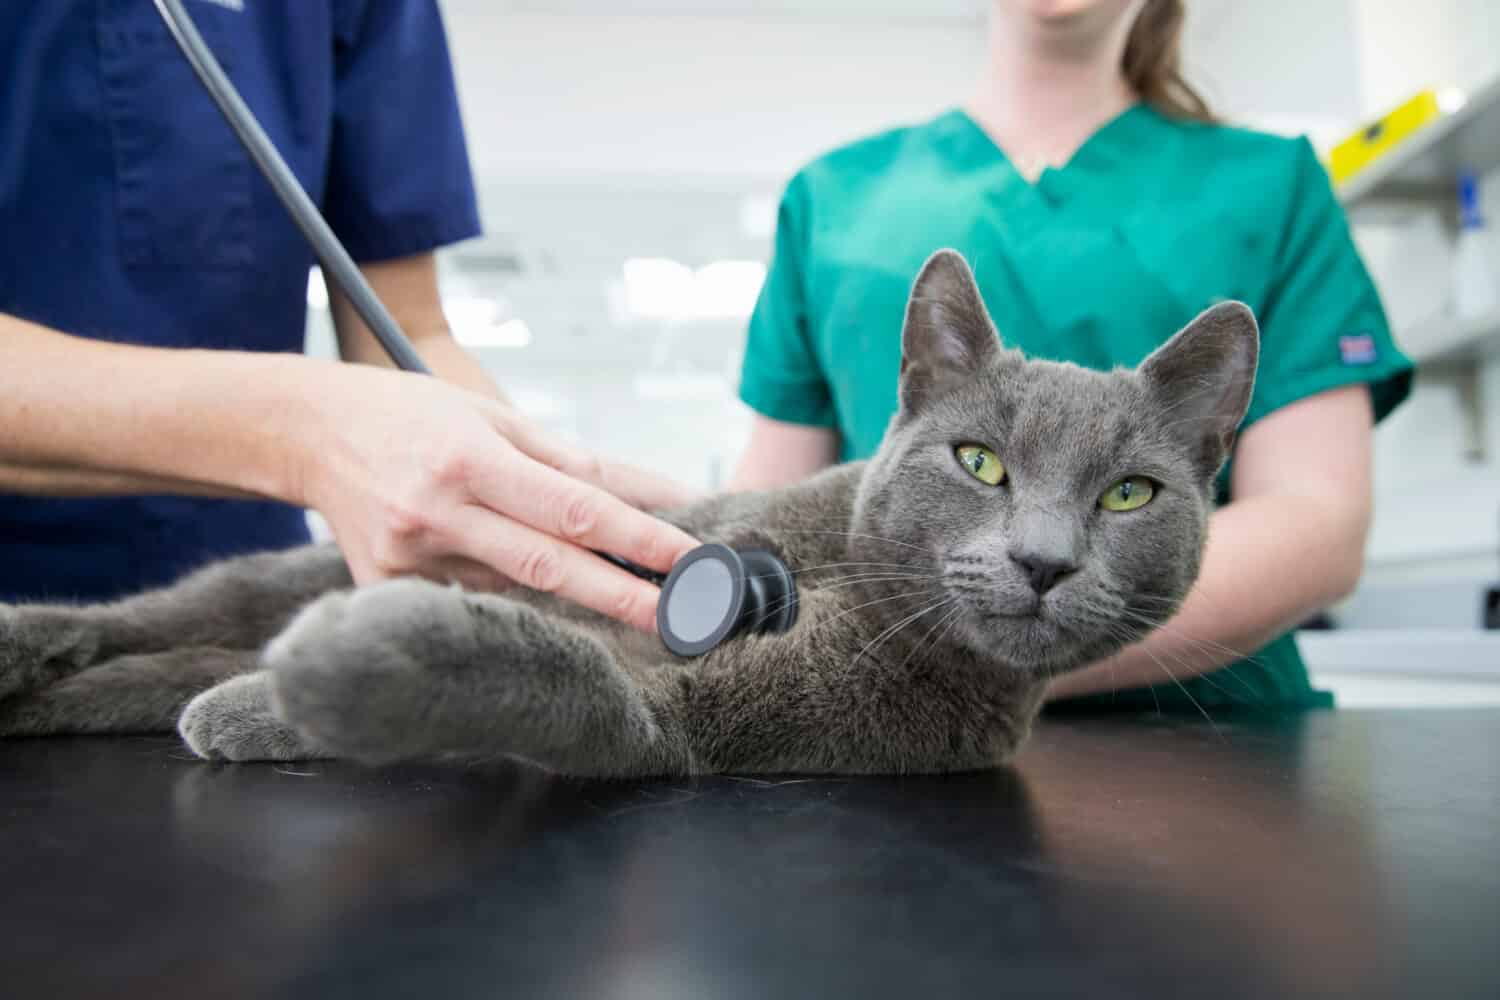 Vet examining pet cat with stethoscope on table in surgery